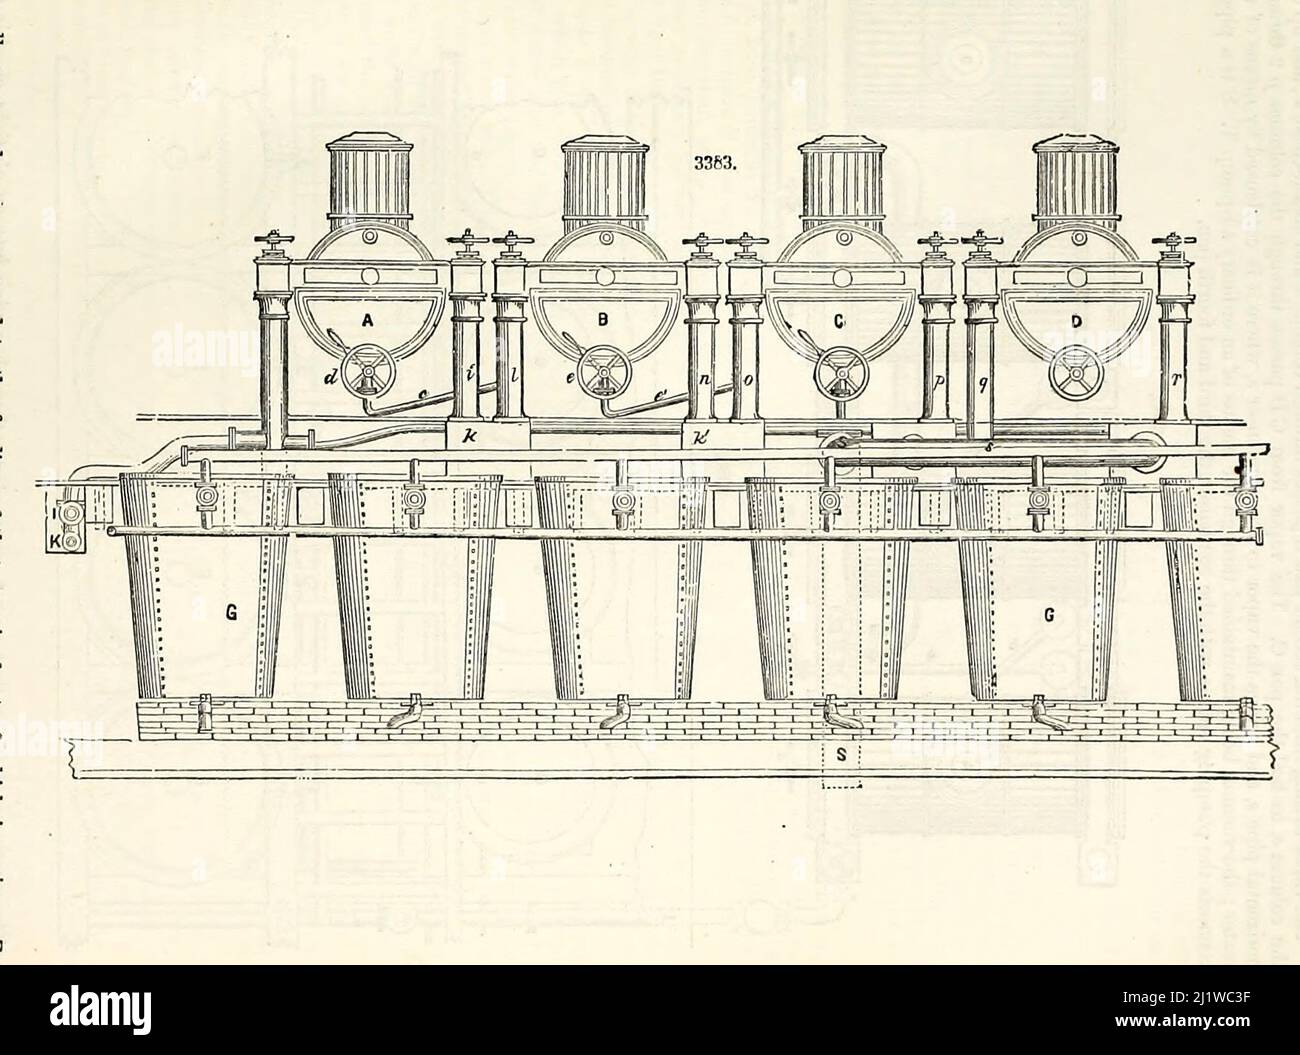 Sugar Boiler from Appleton's dictionary of machines, mechanics, engine-work, and engineering : illustrated with four thousand engravings on wood ; in two volumes by D. Appleton and Company Published New York : D. Appleton and Co 1873 Stock Photo